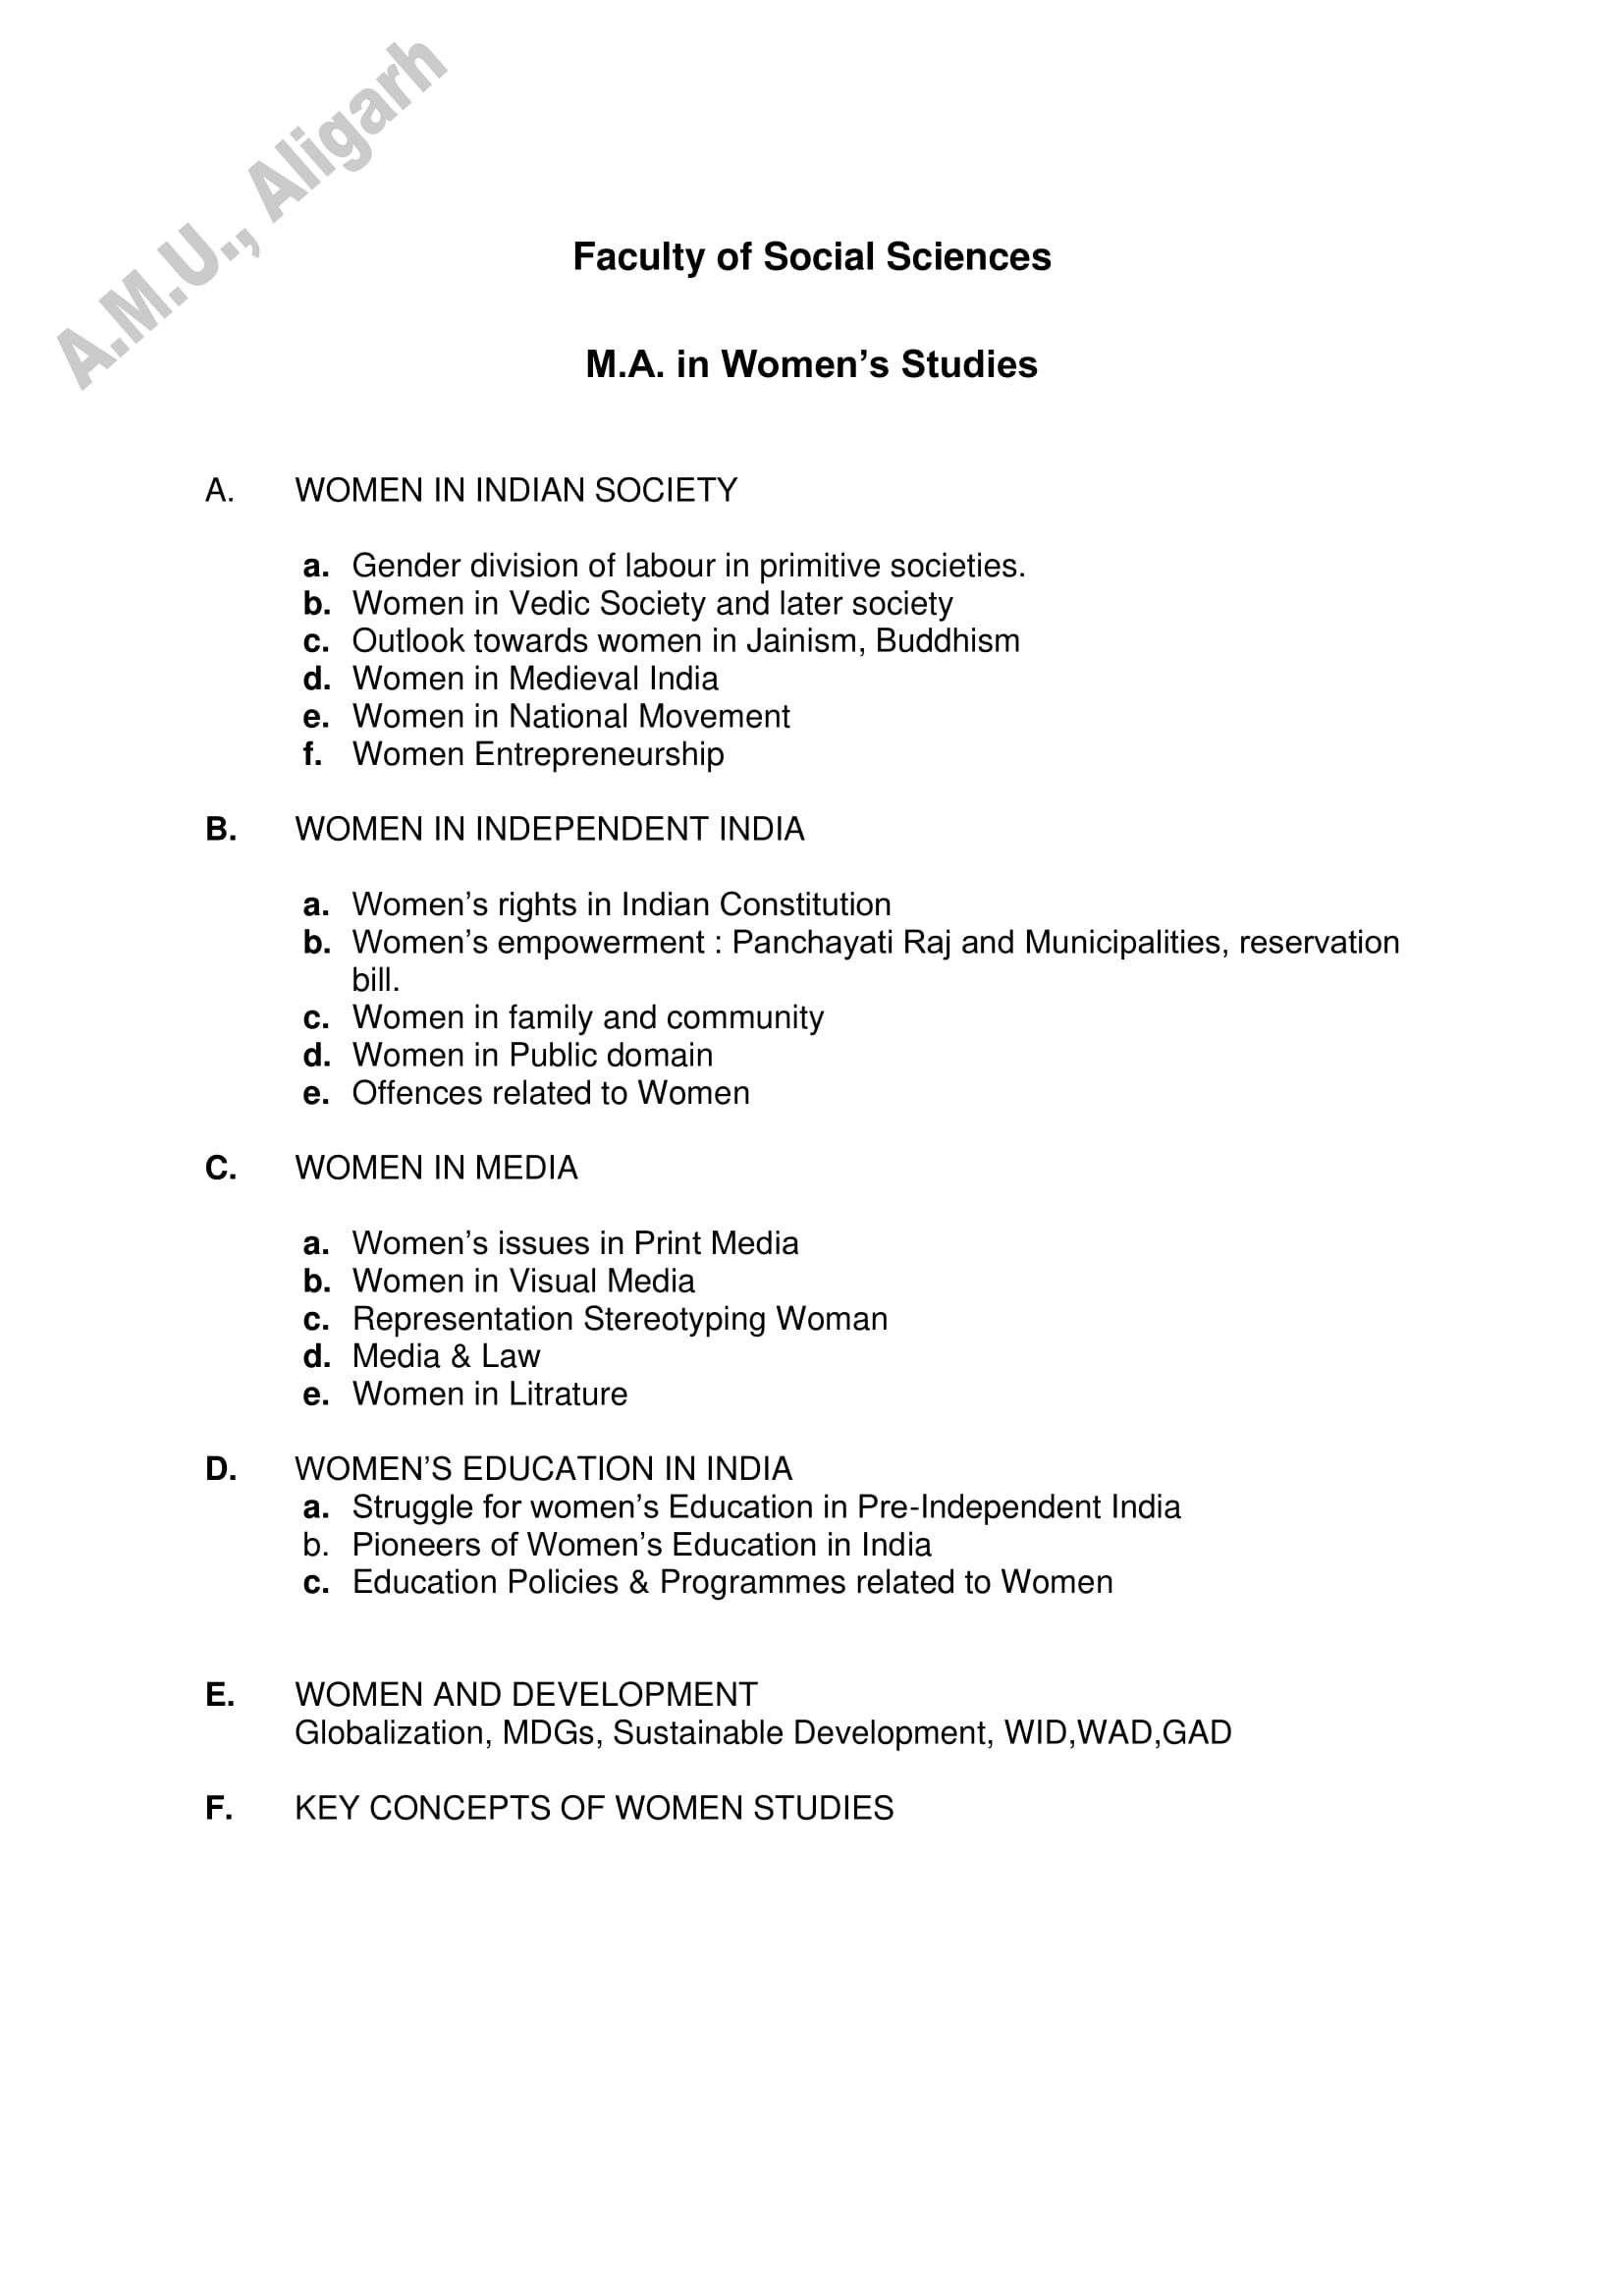 AMU Entrance Exam Syllabus for M.A. in Women's Studies - Page 1